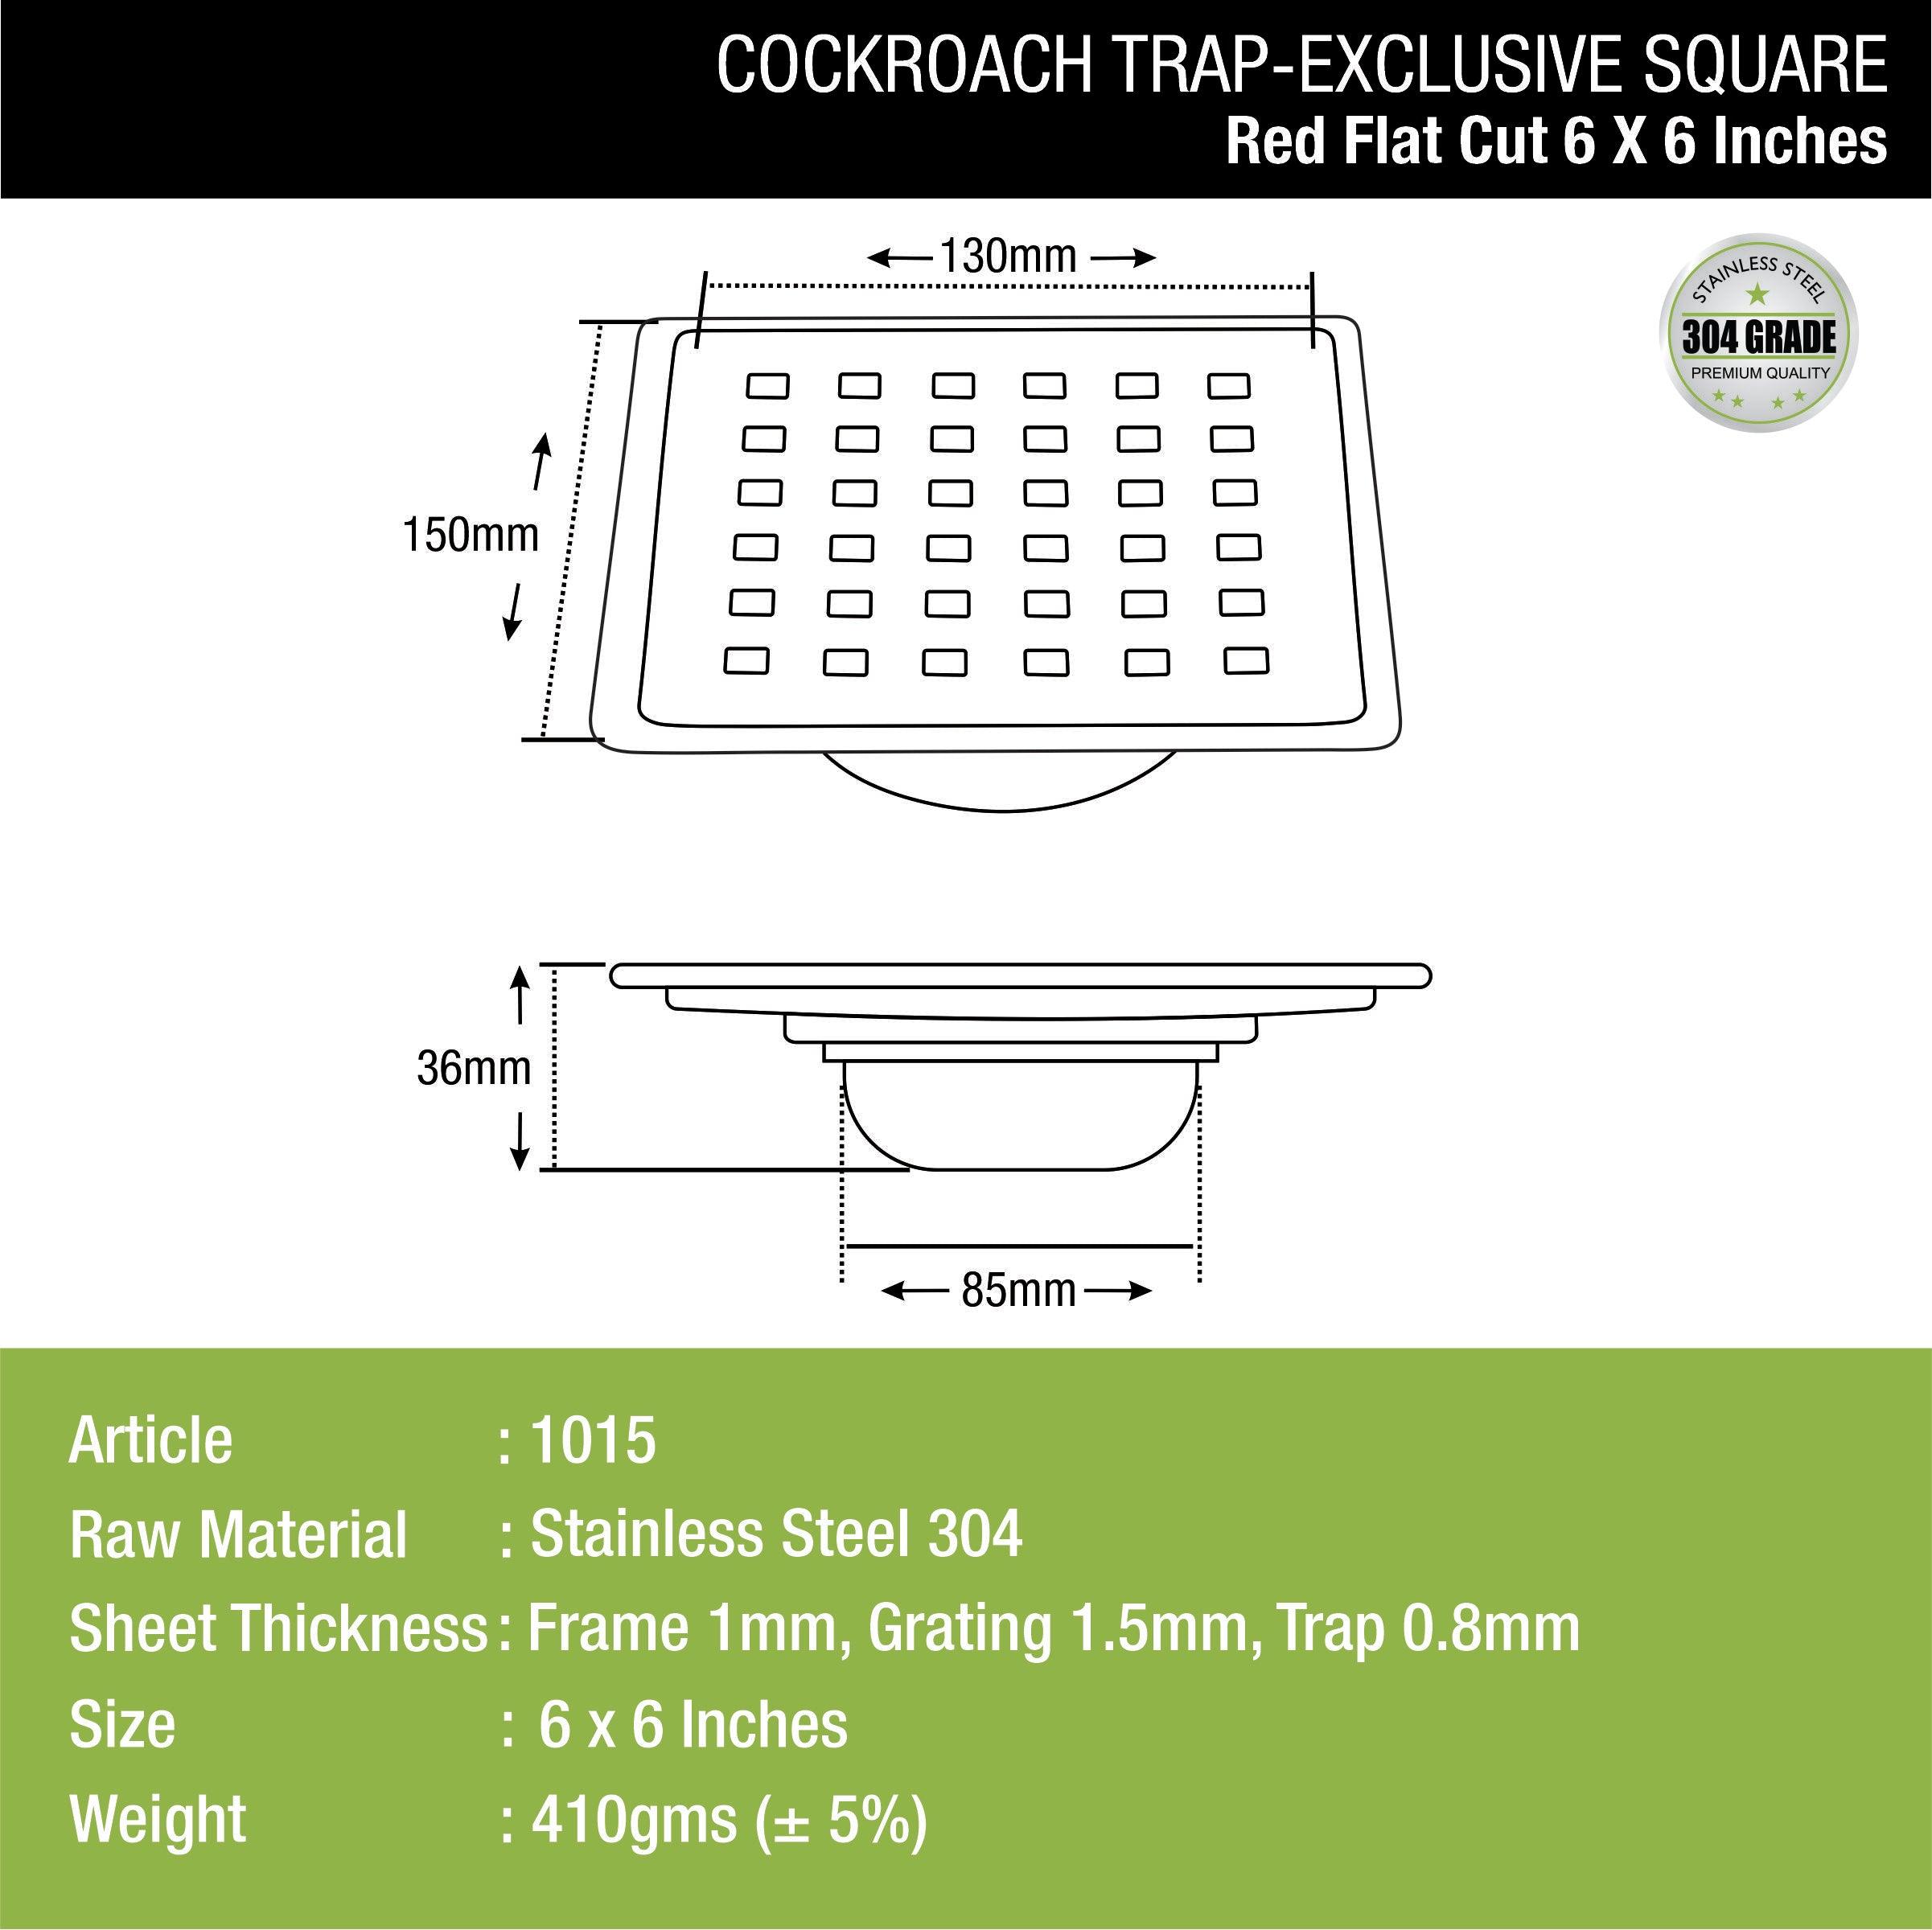 Red Exclusive Square Flat Cut Floor Drain (6 x 6 Inches) with Cockroach Trap dimensions and sizes